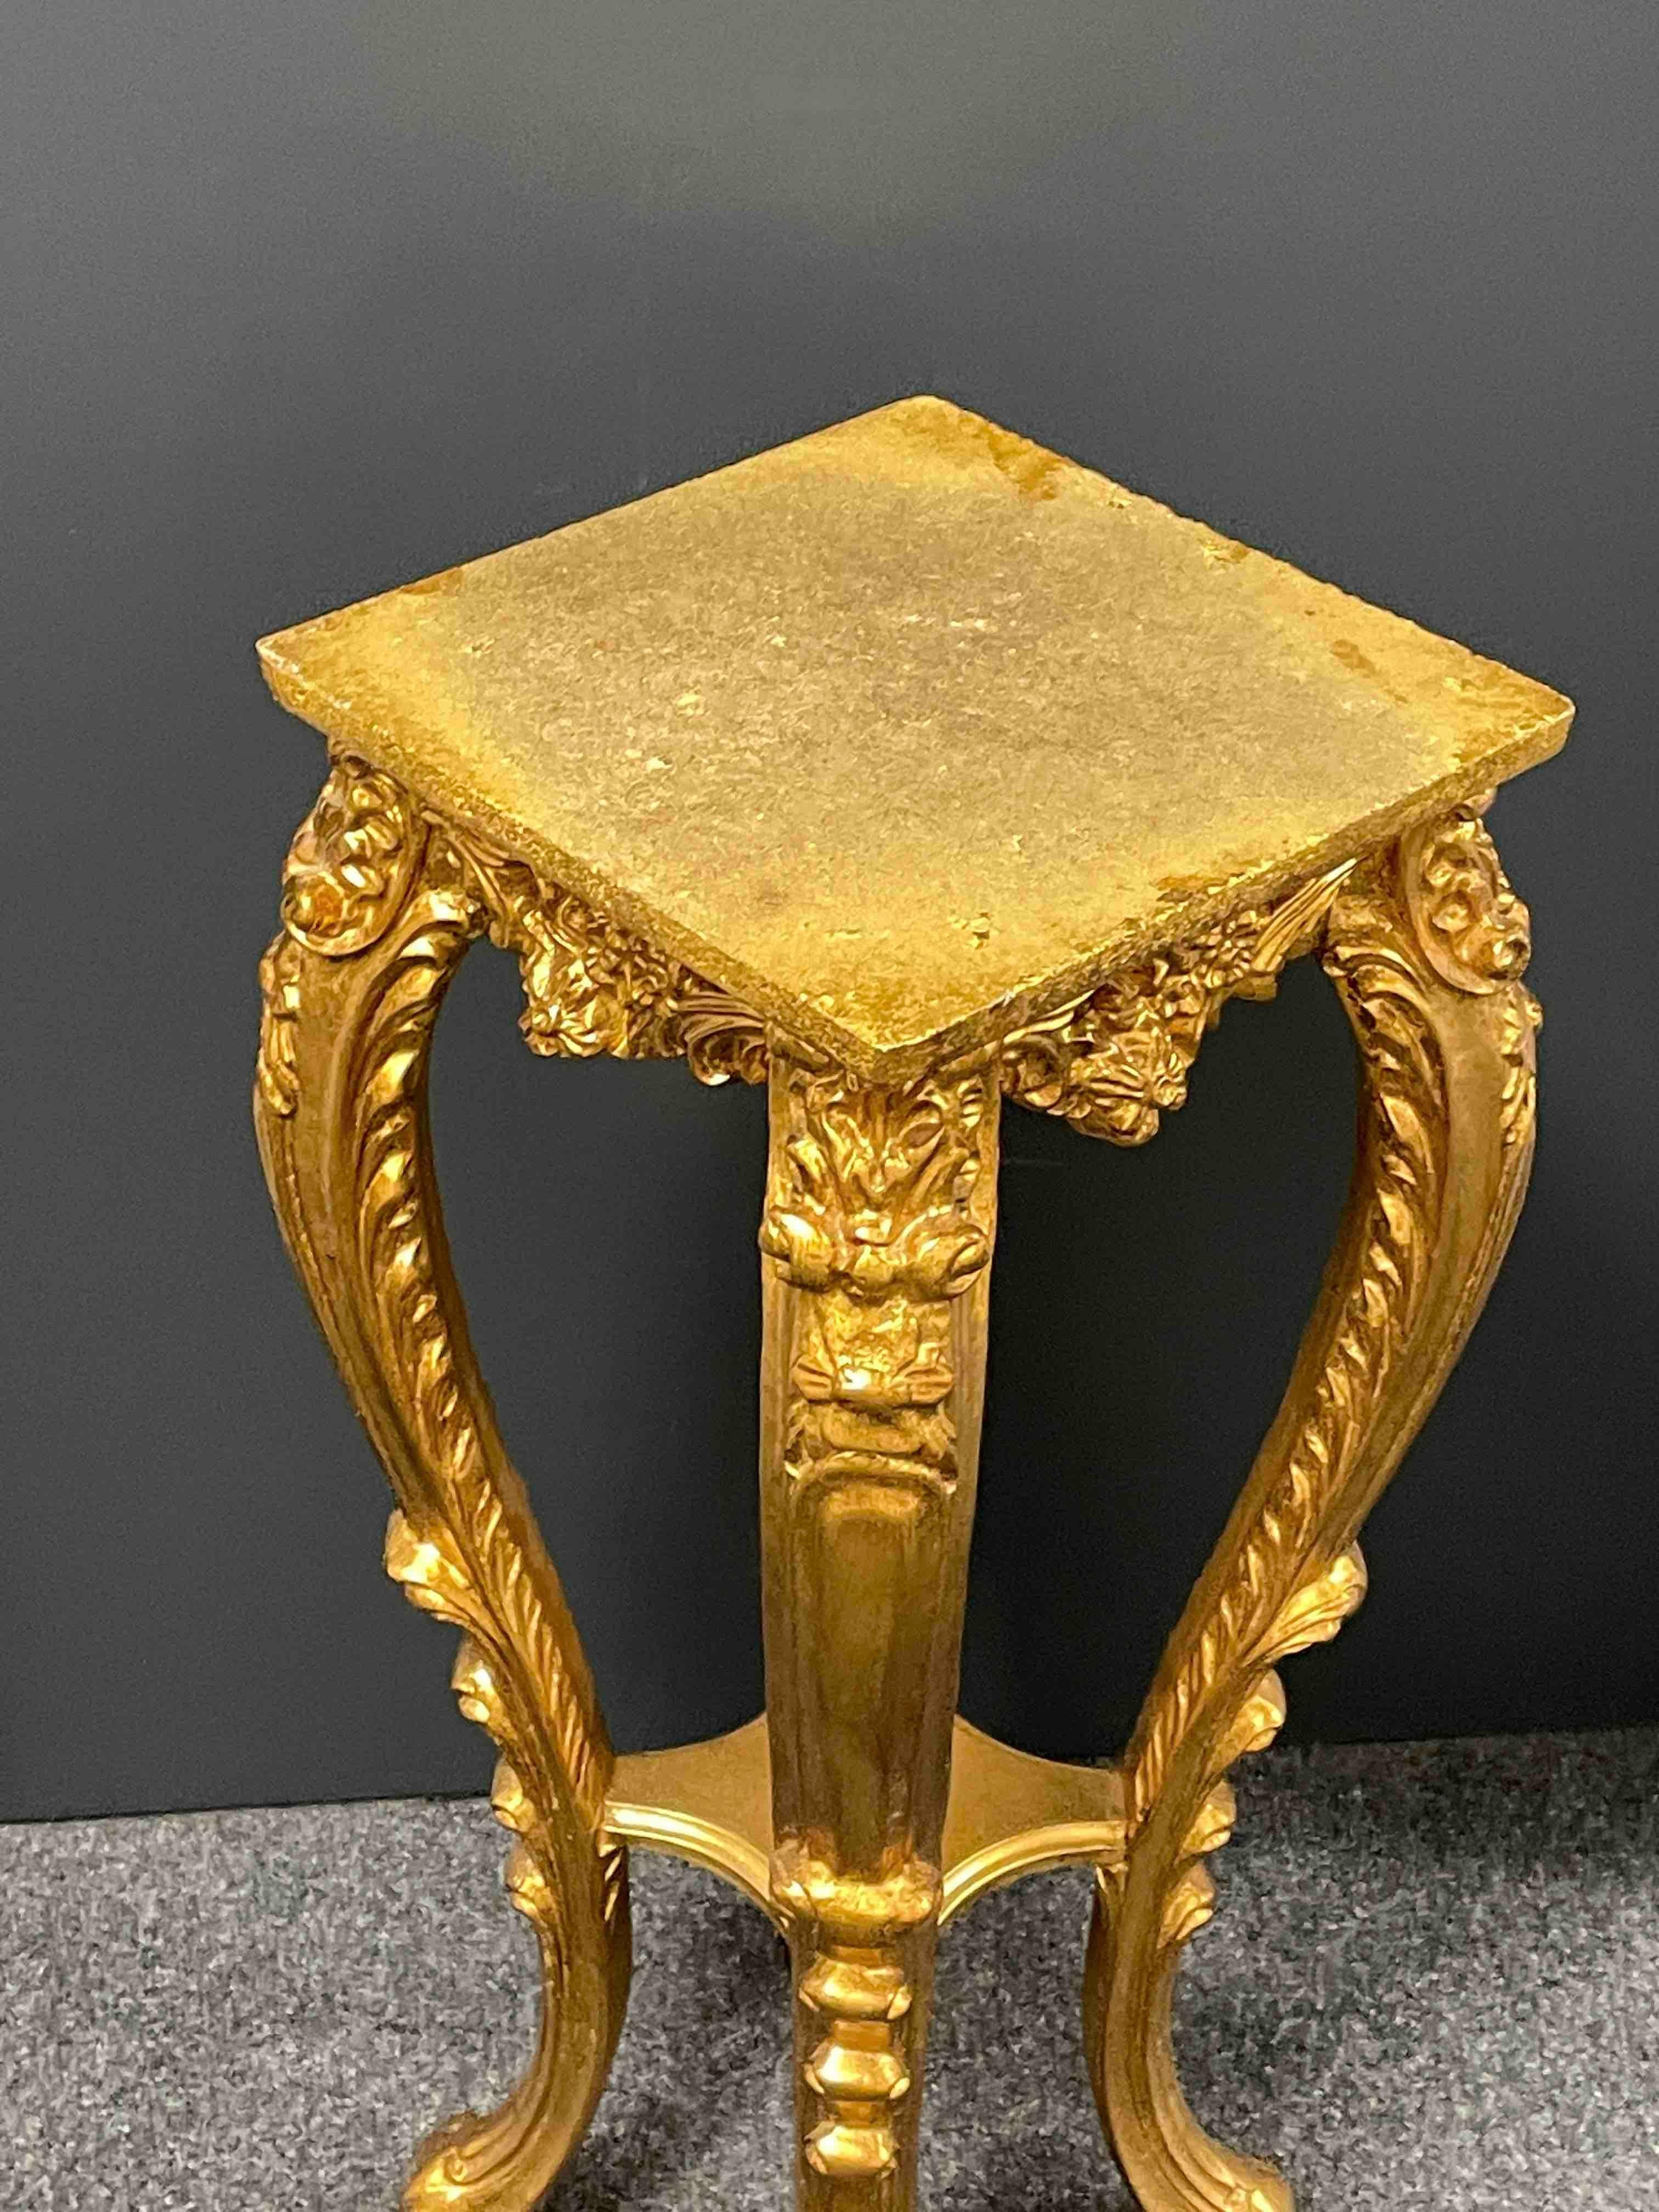 20th Century Carved Gilt Wood Toleware Console Pedestal Table, Italy For Sale 9